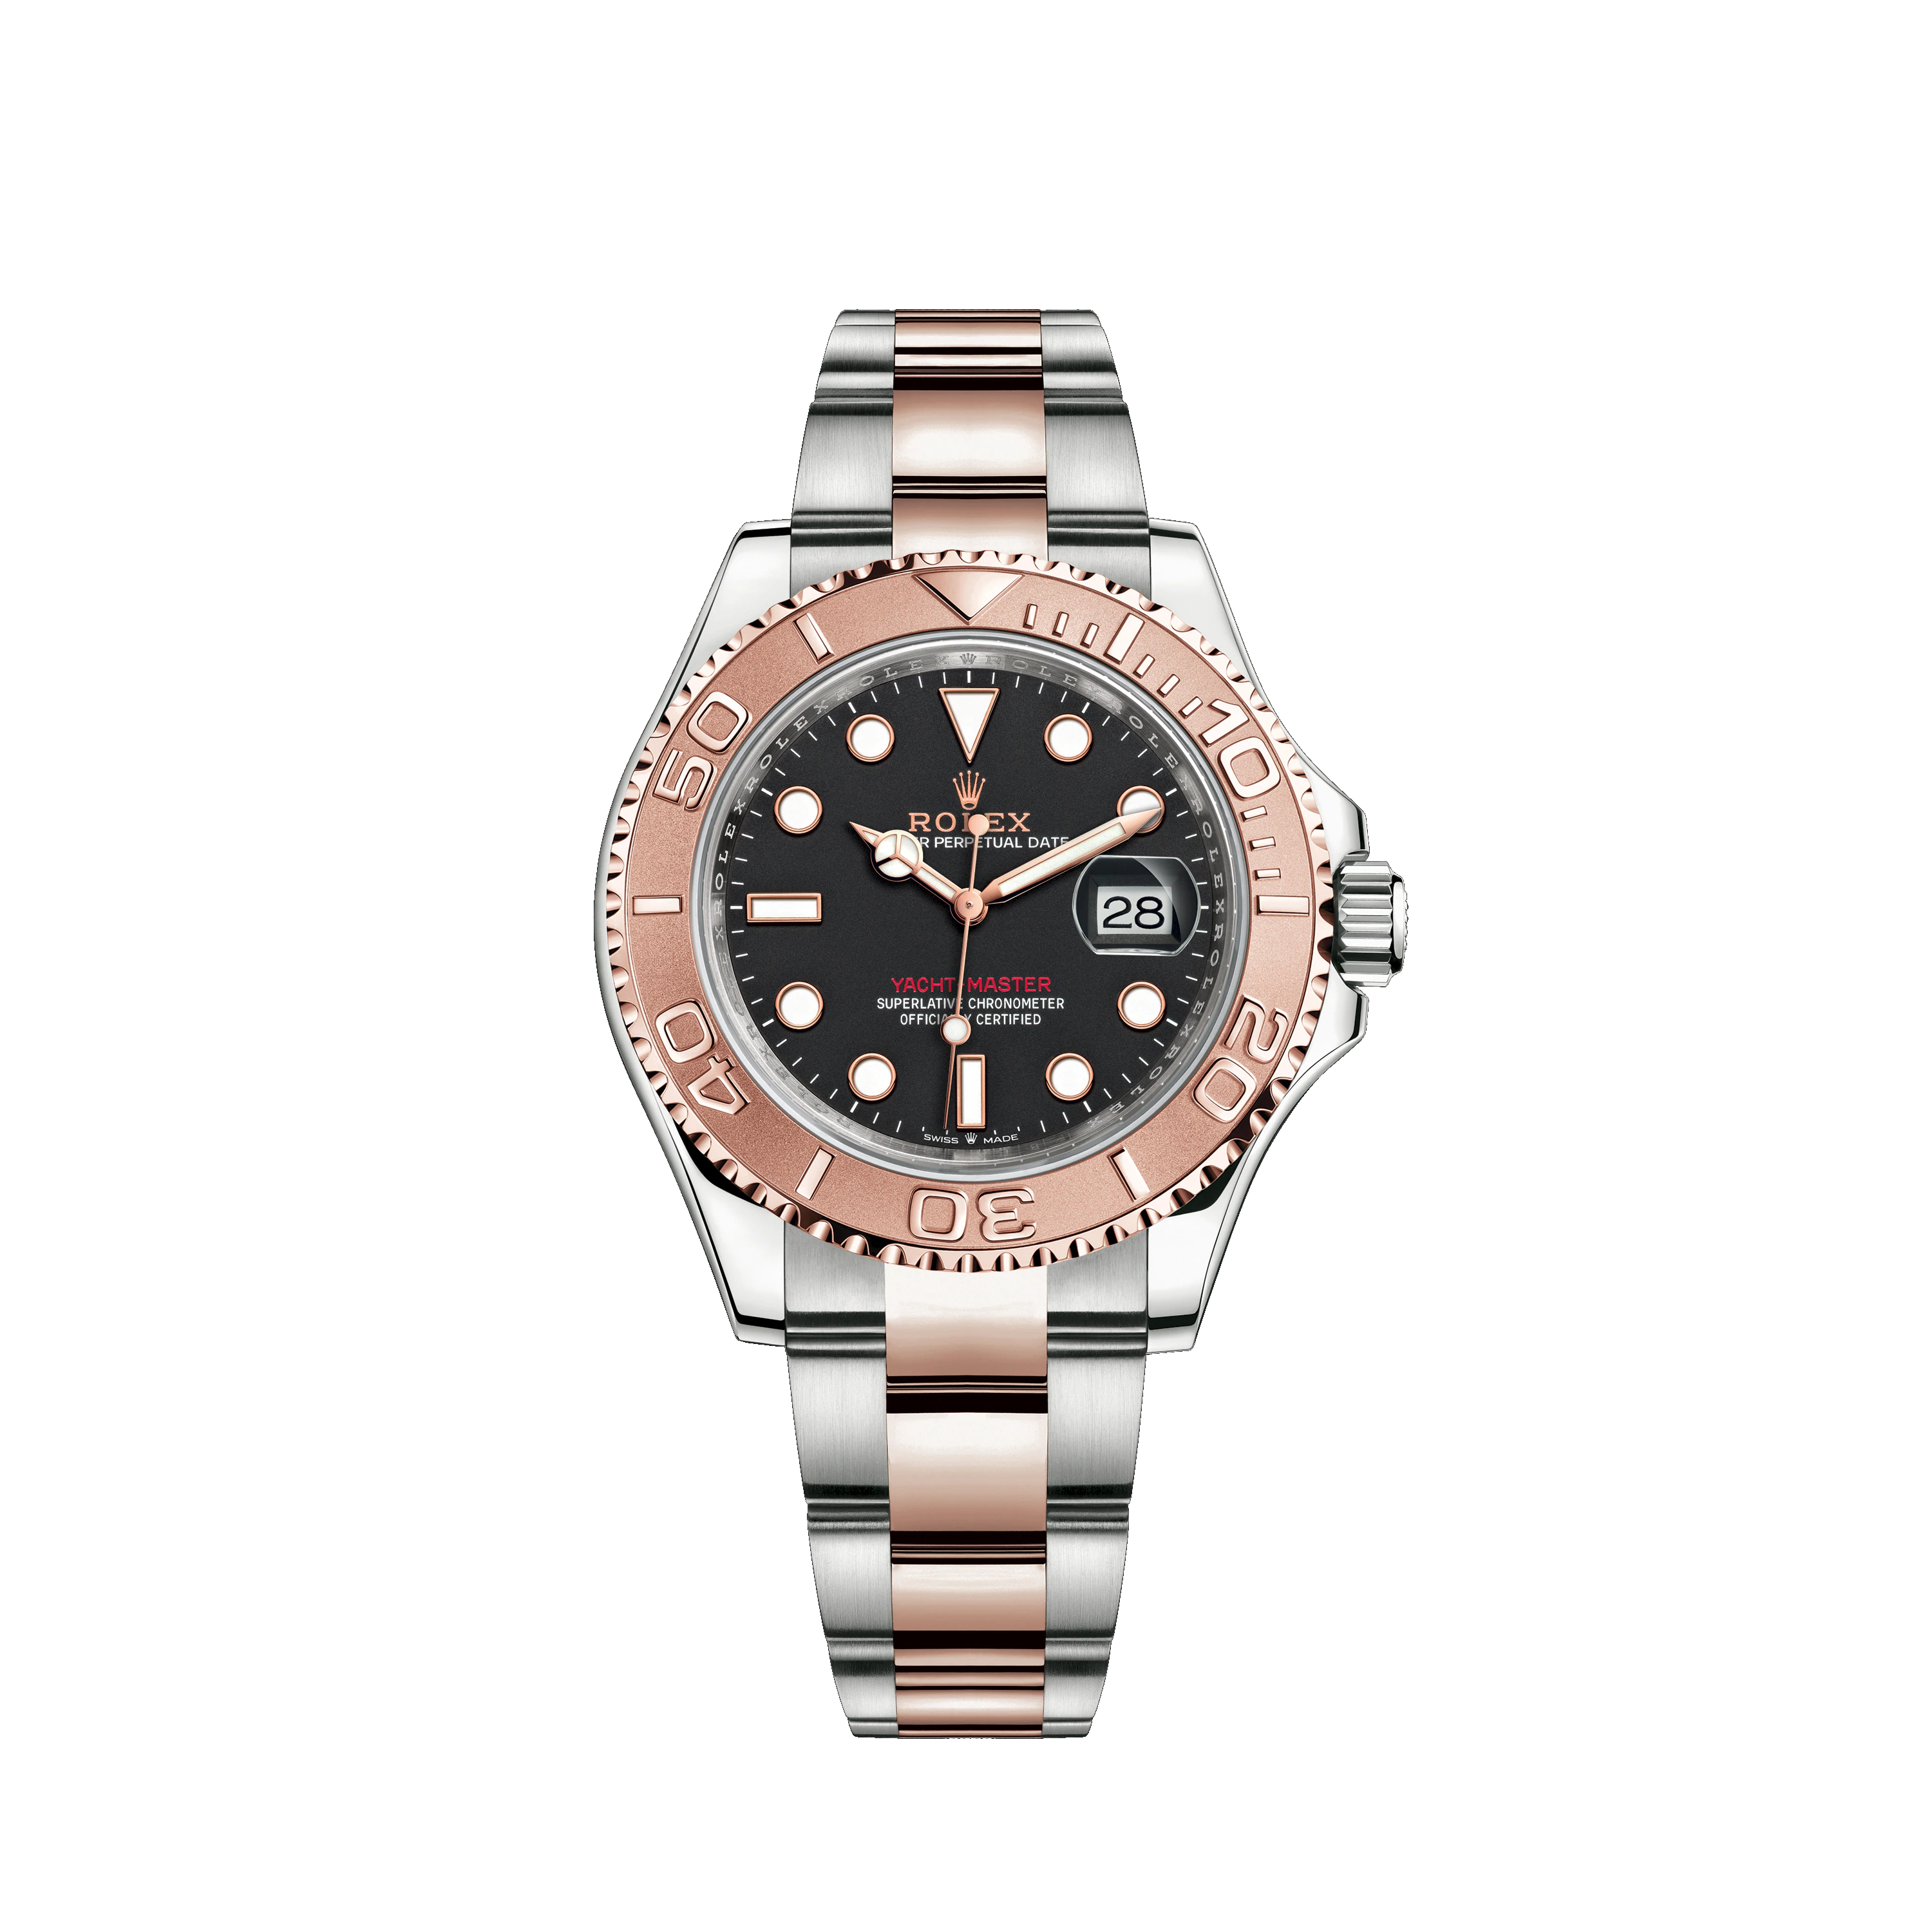 Yacht-Master 40 126621 Rose Gold & Stainless Steel Watch (Black)